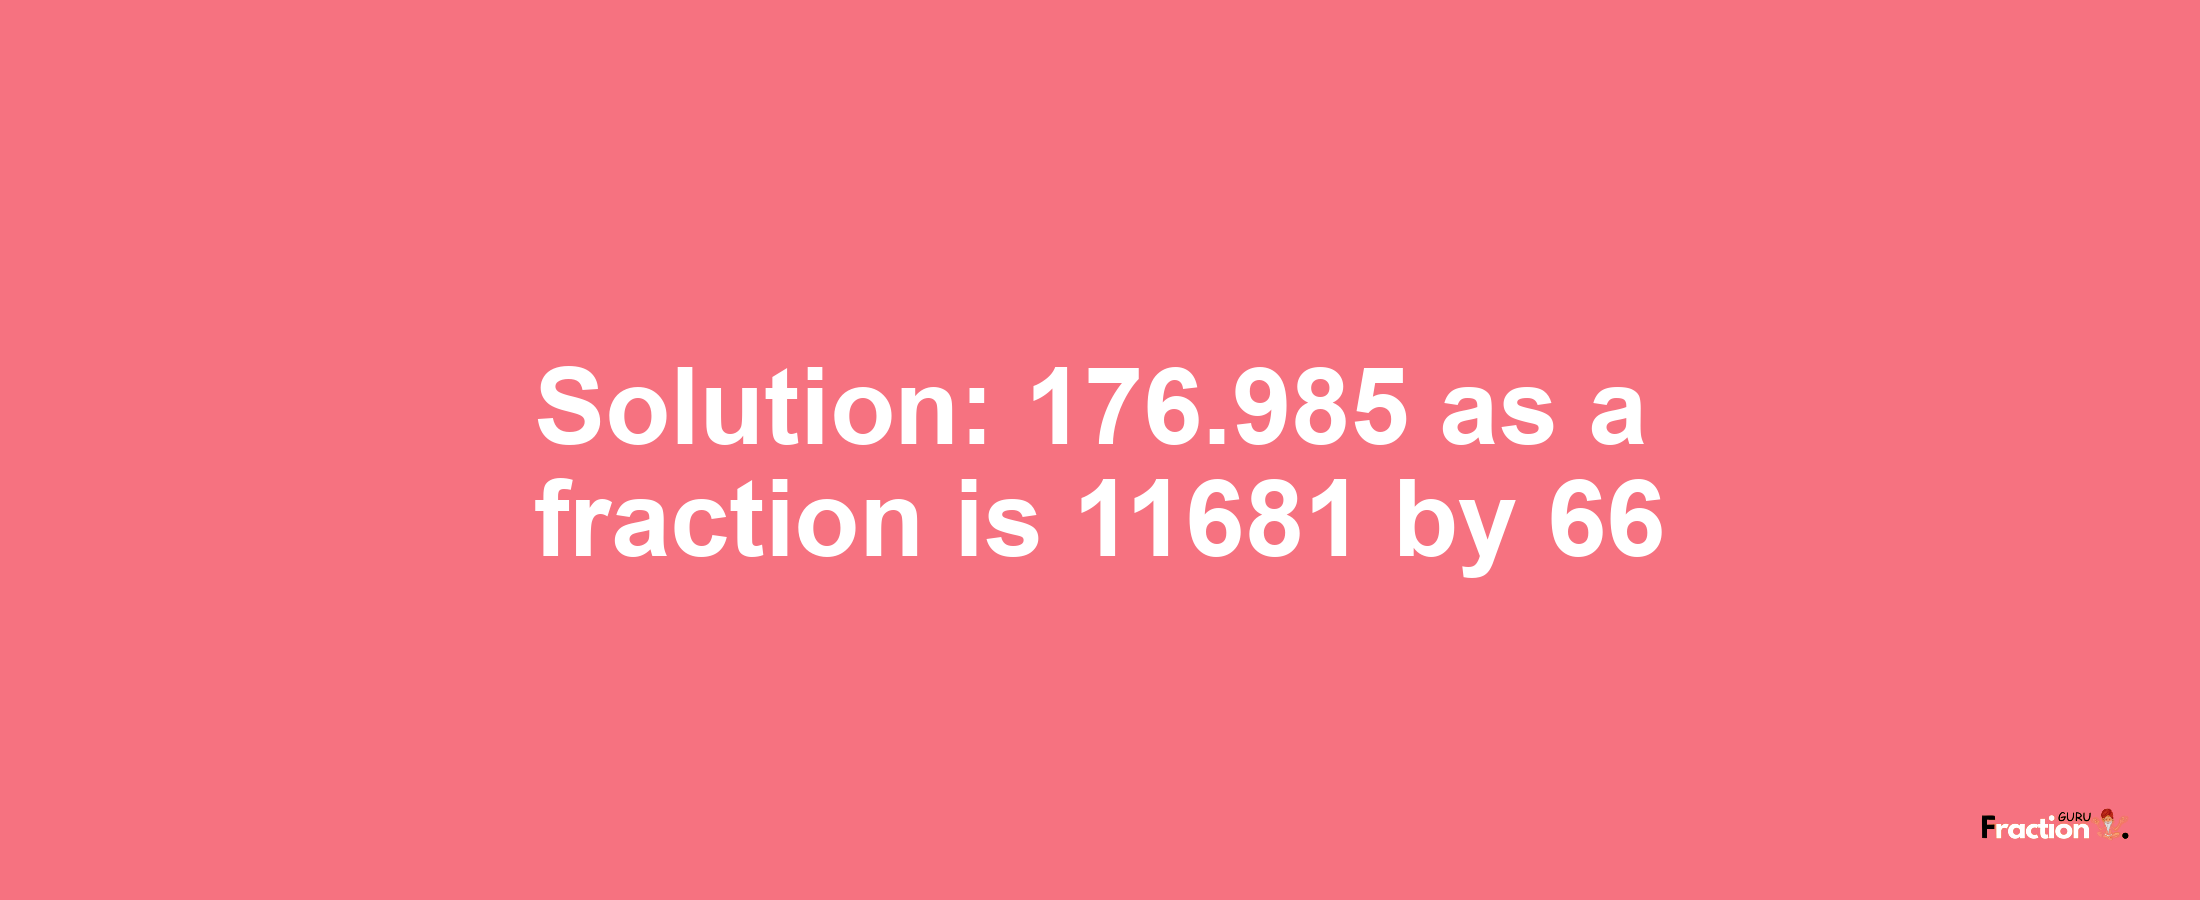 Solution:176.985 as a fraction is 11681/66